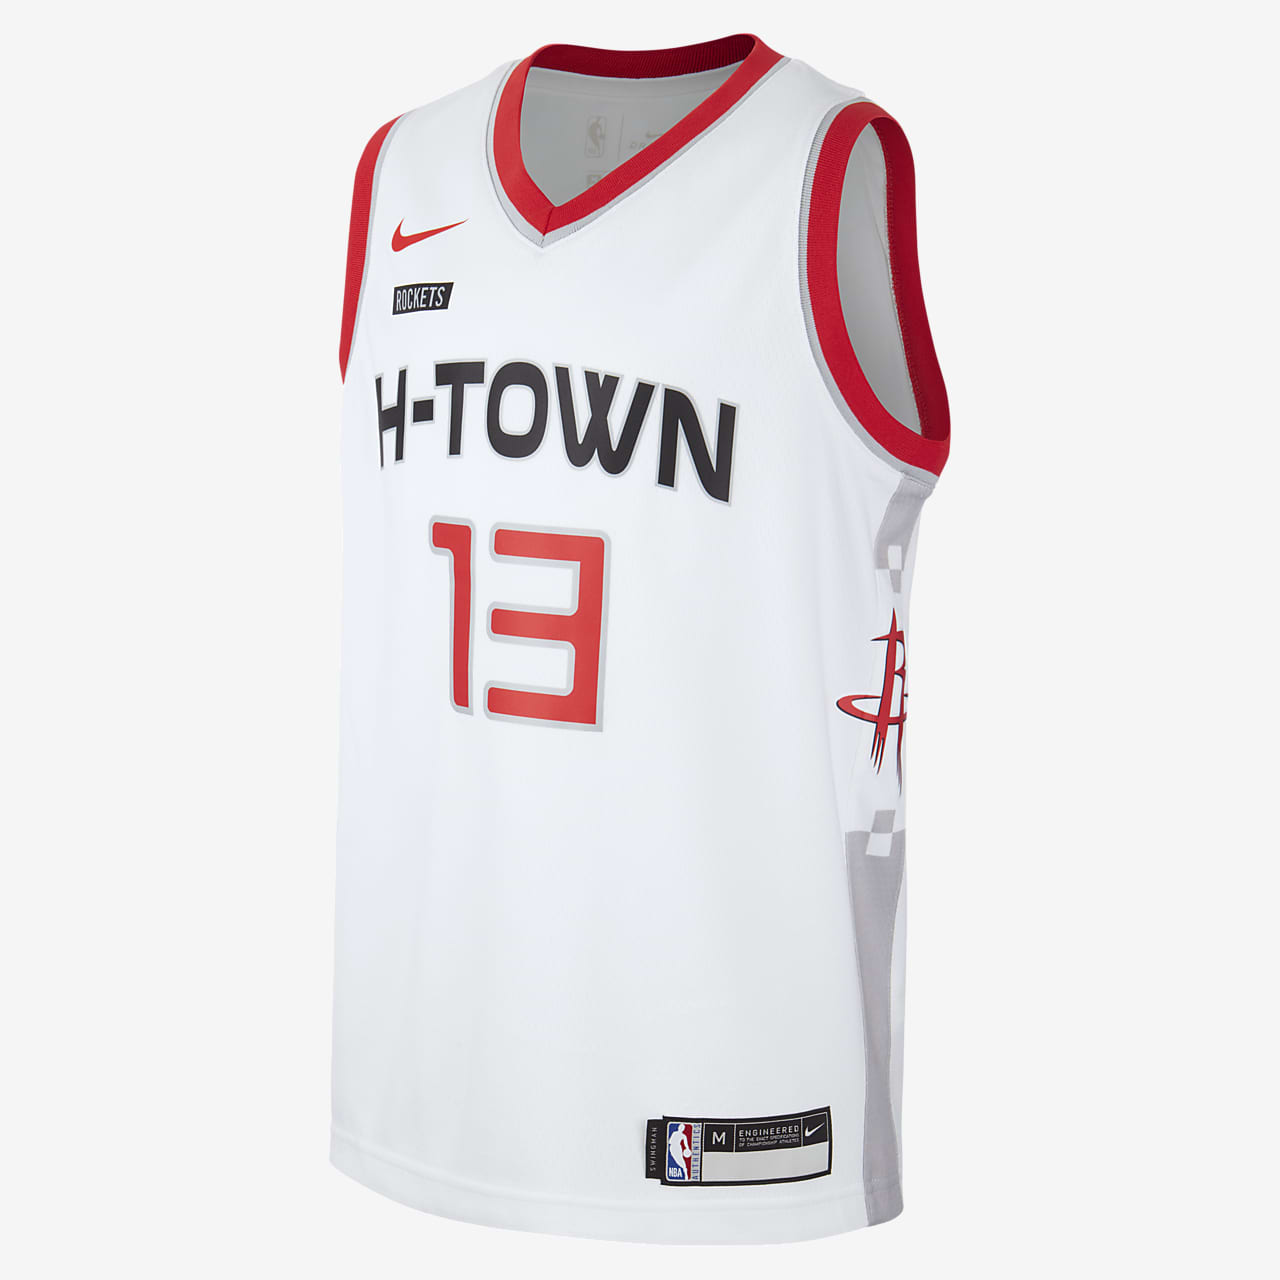 the rockets jersey